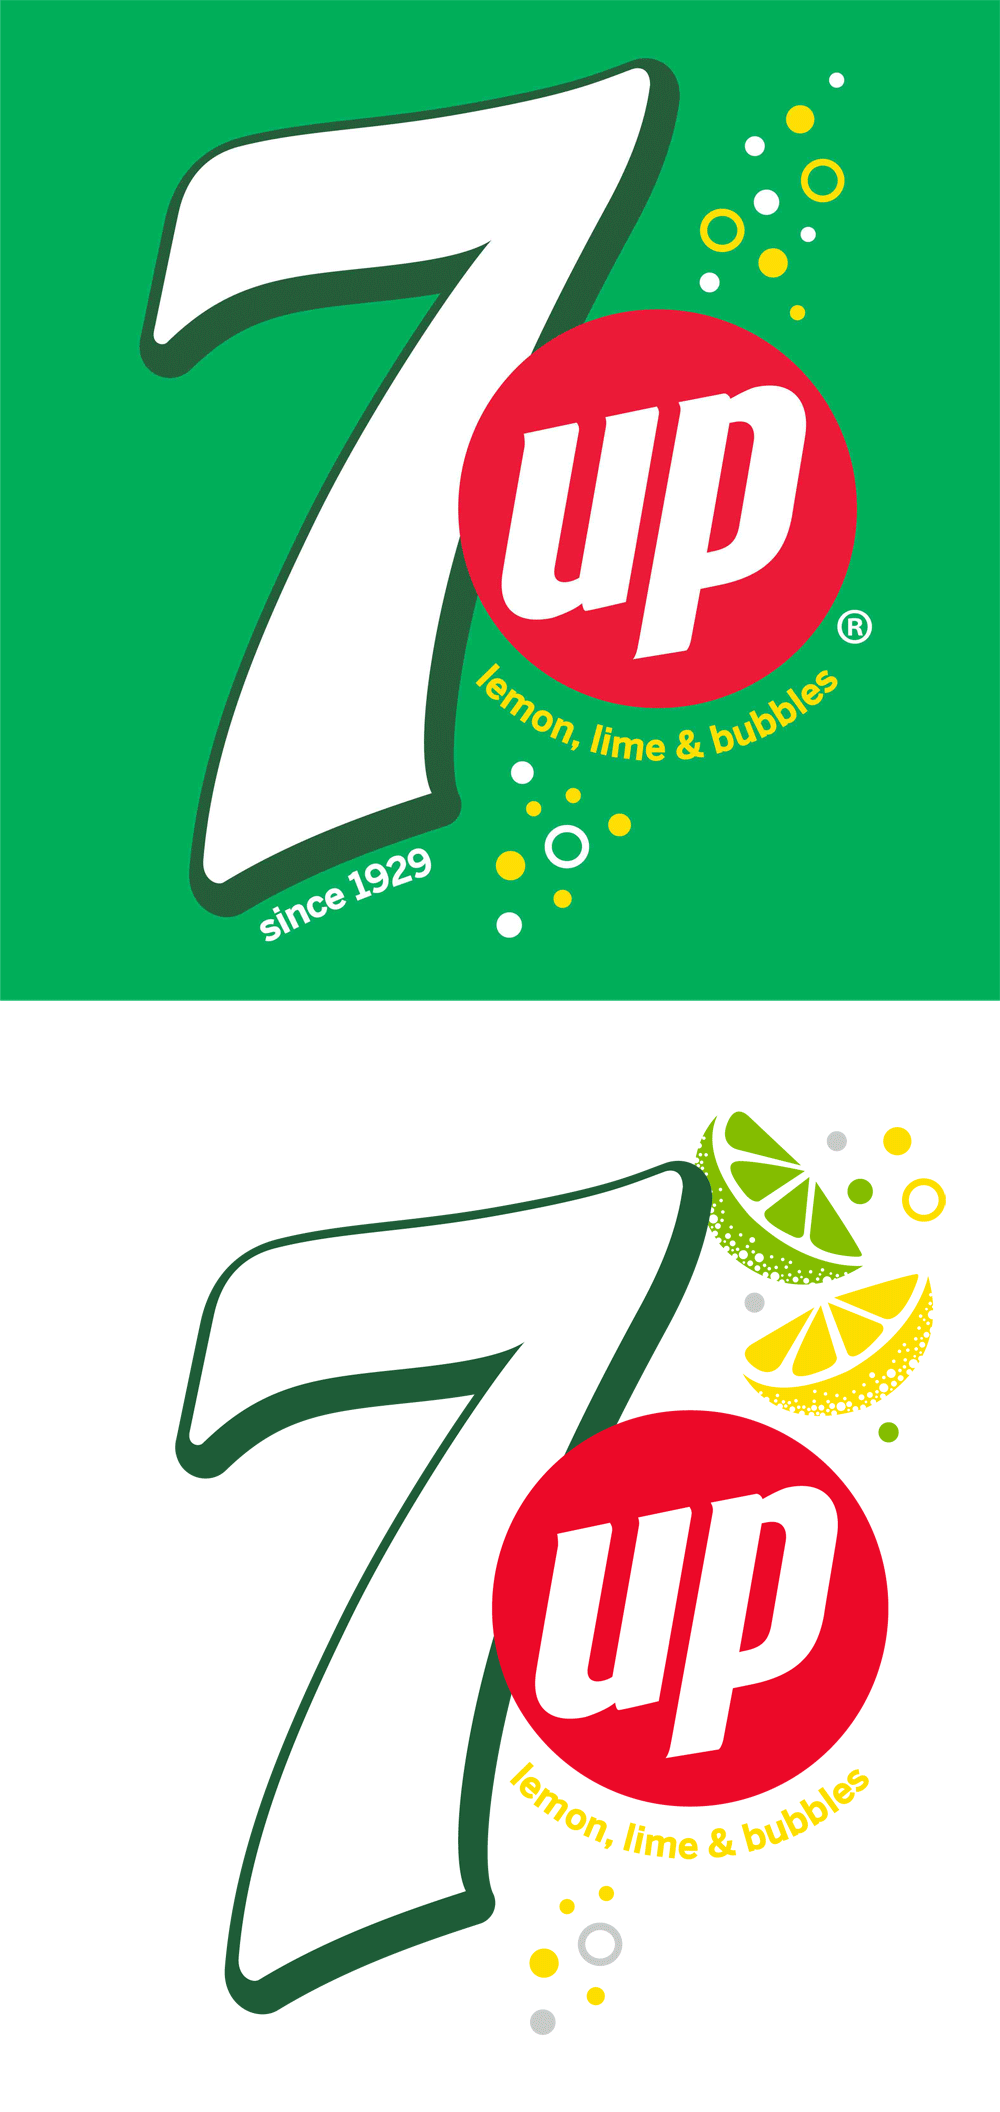 PepsiCo Global Logo - Brand New: New Logo and Packaging for PepsiCo's 7up